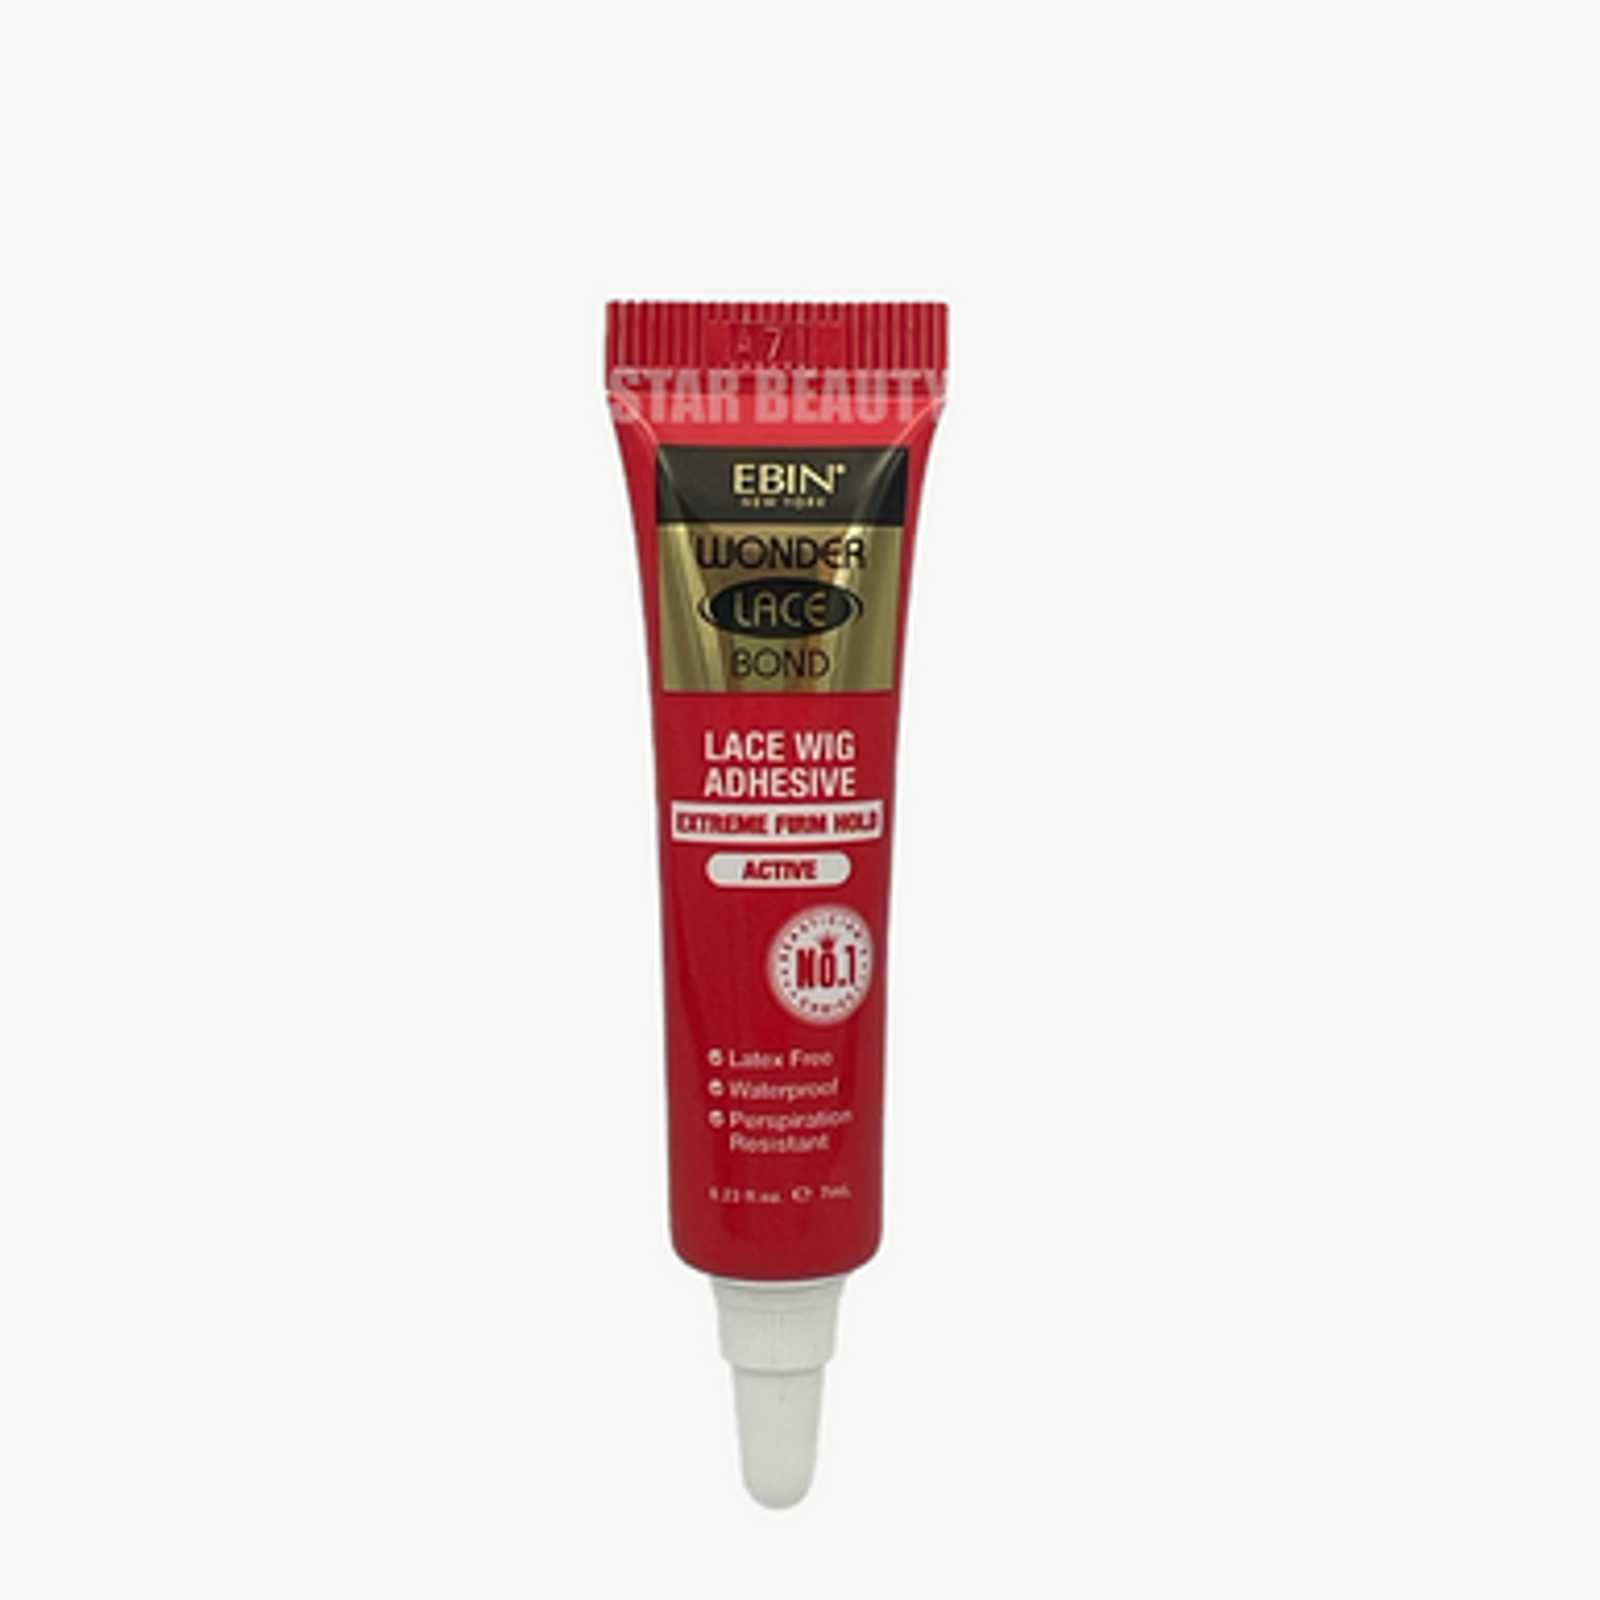 EBIN Wonder Lace Bond: Waterproof Adhesive - Extreme Firm Hold | Mandy's  Beauty Supply